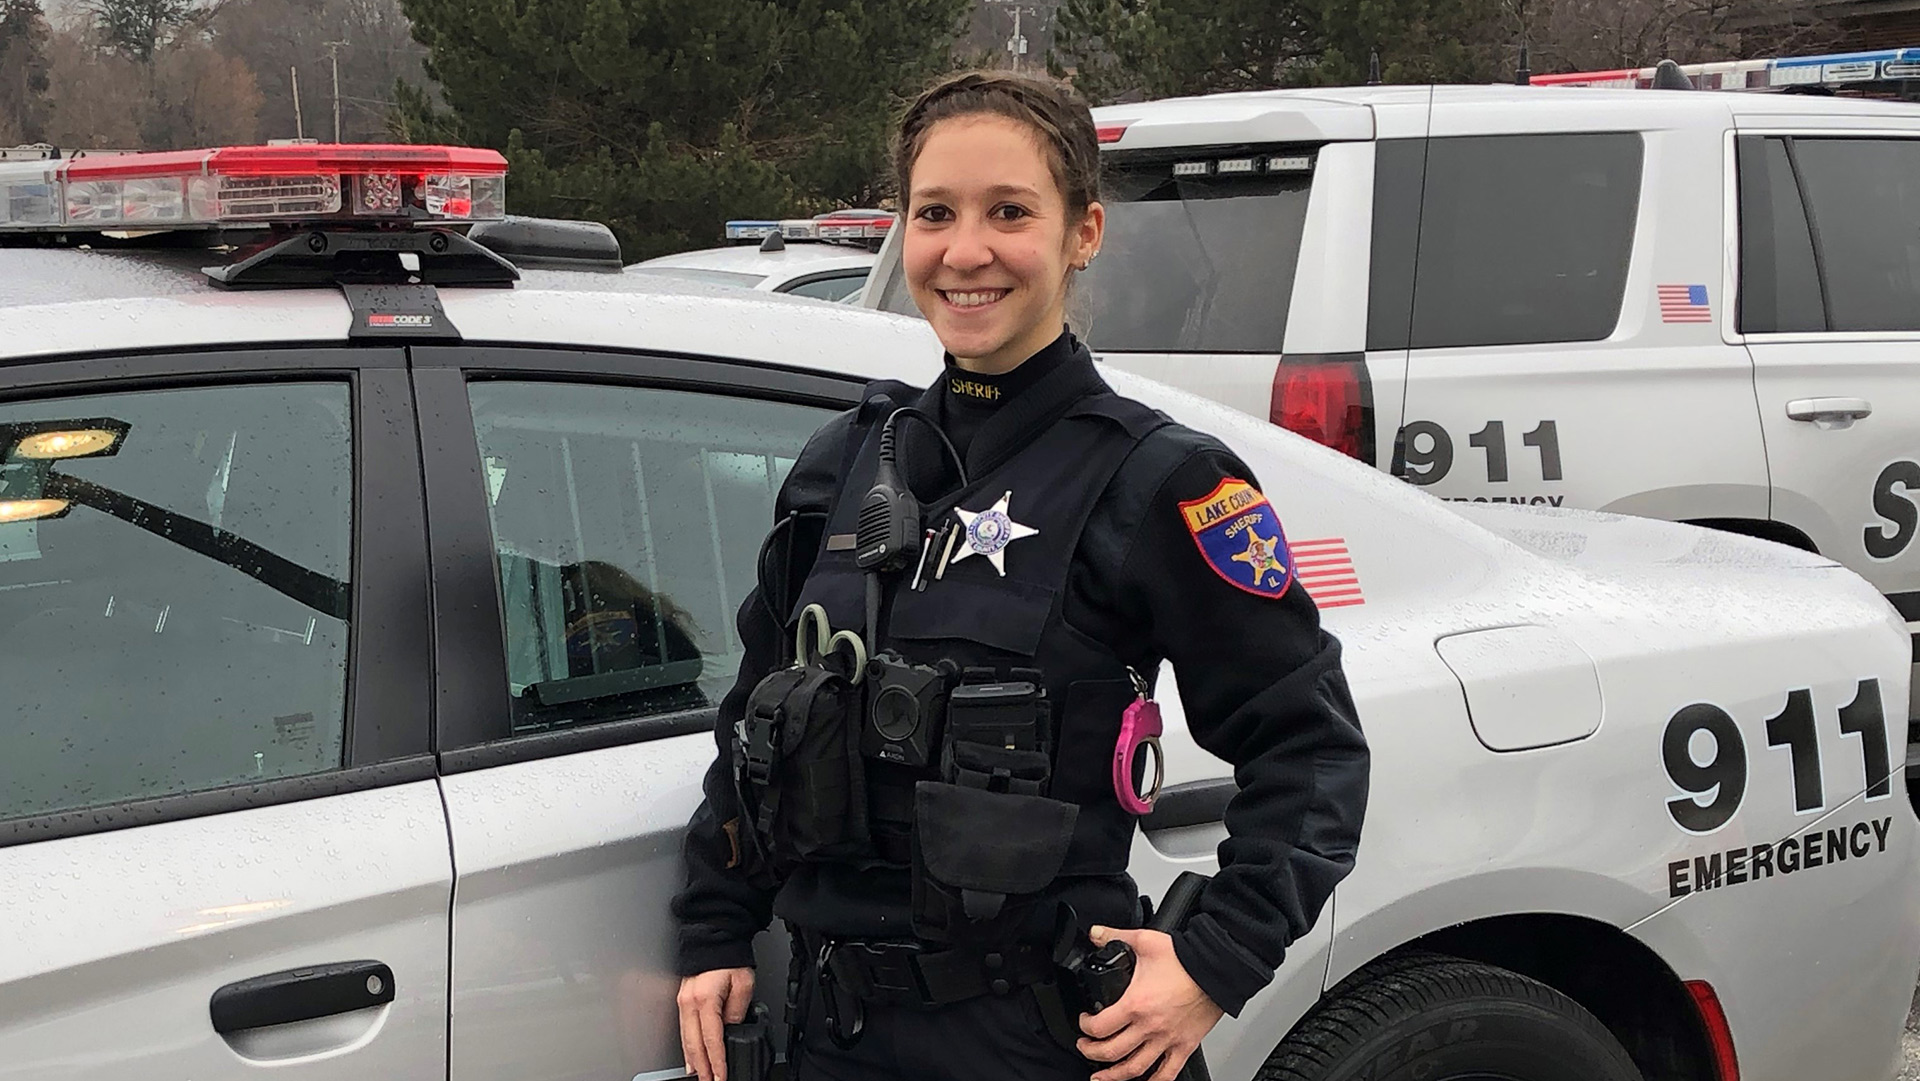 'I Would Do This Job For Free': Live PD's Deputy Rebecca Loeb on Going from Lawyer to Law Enforcement